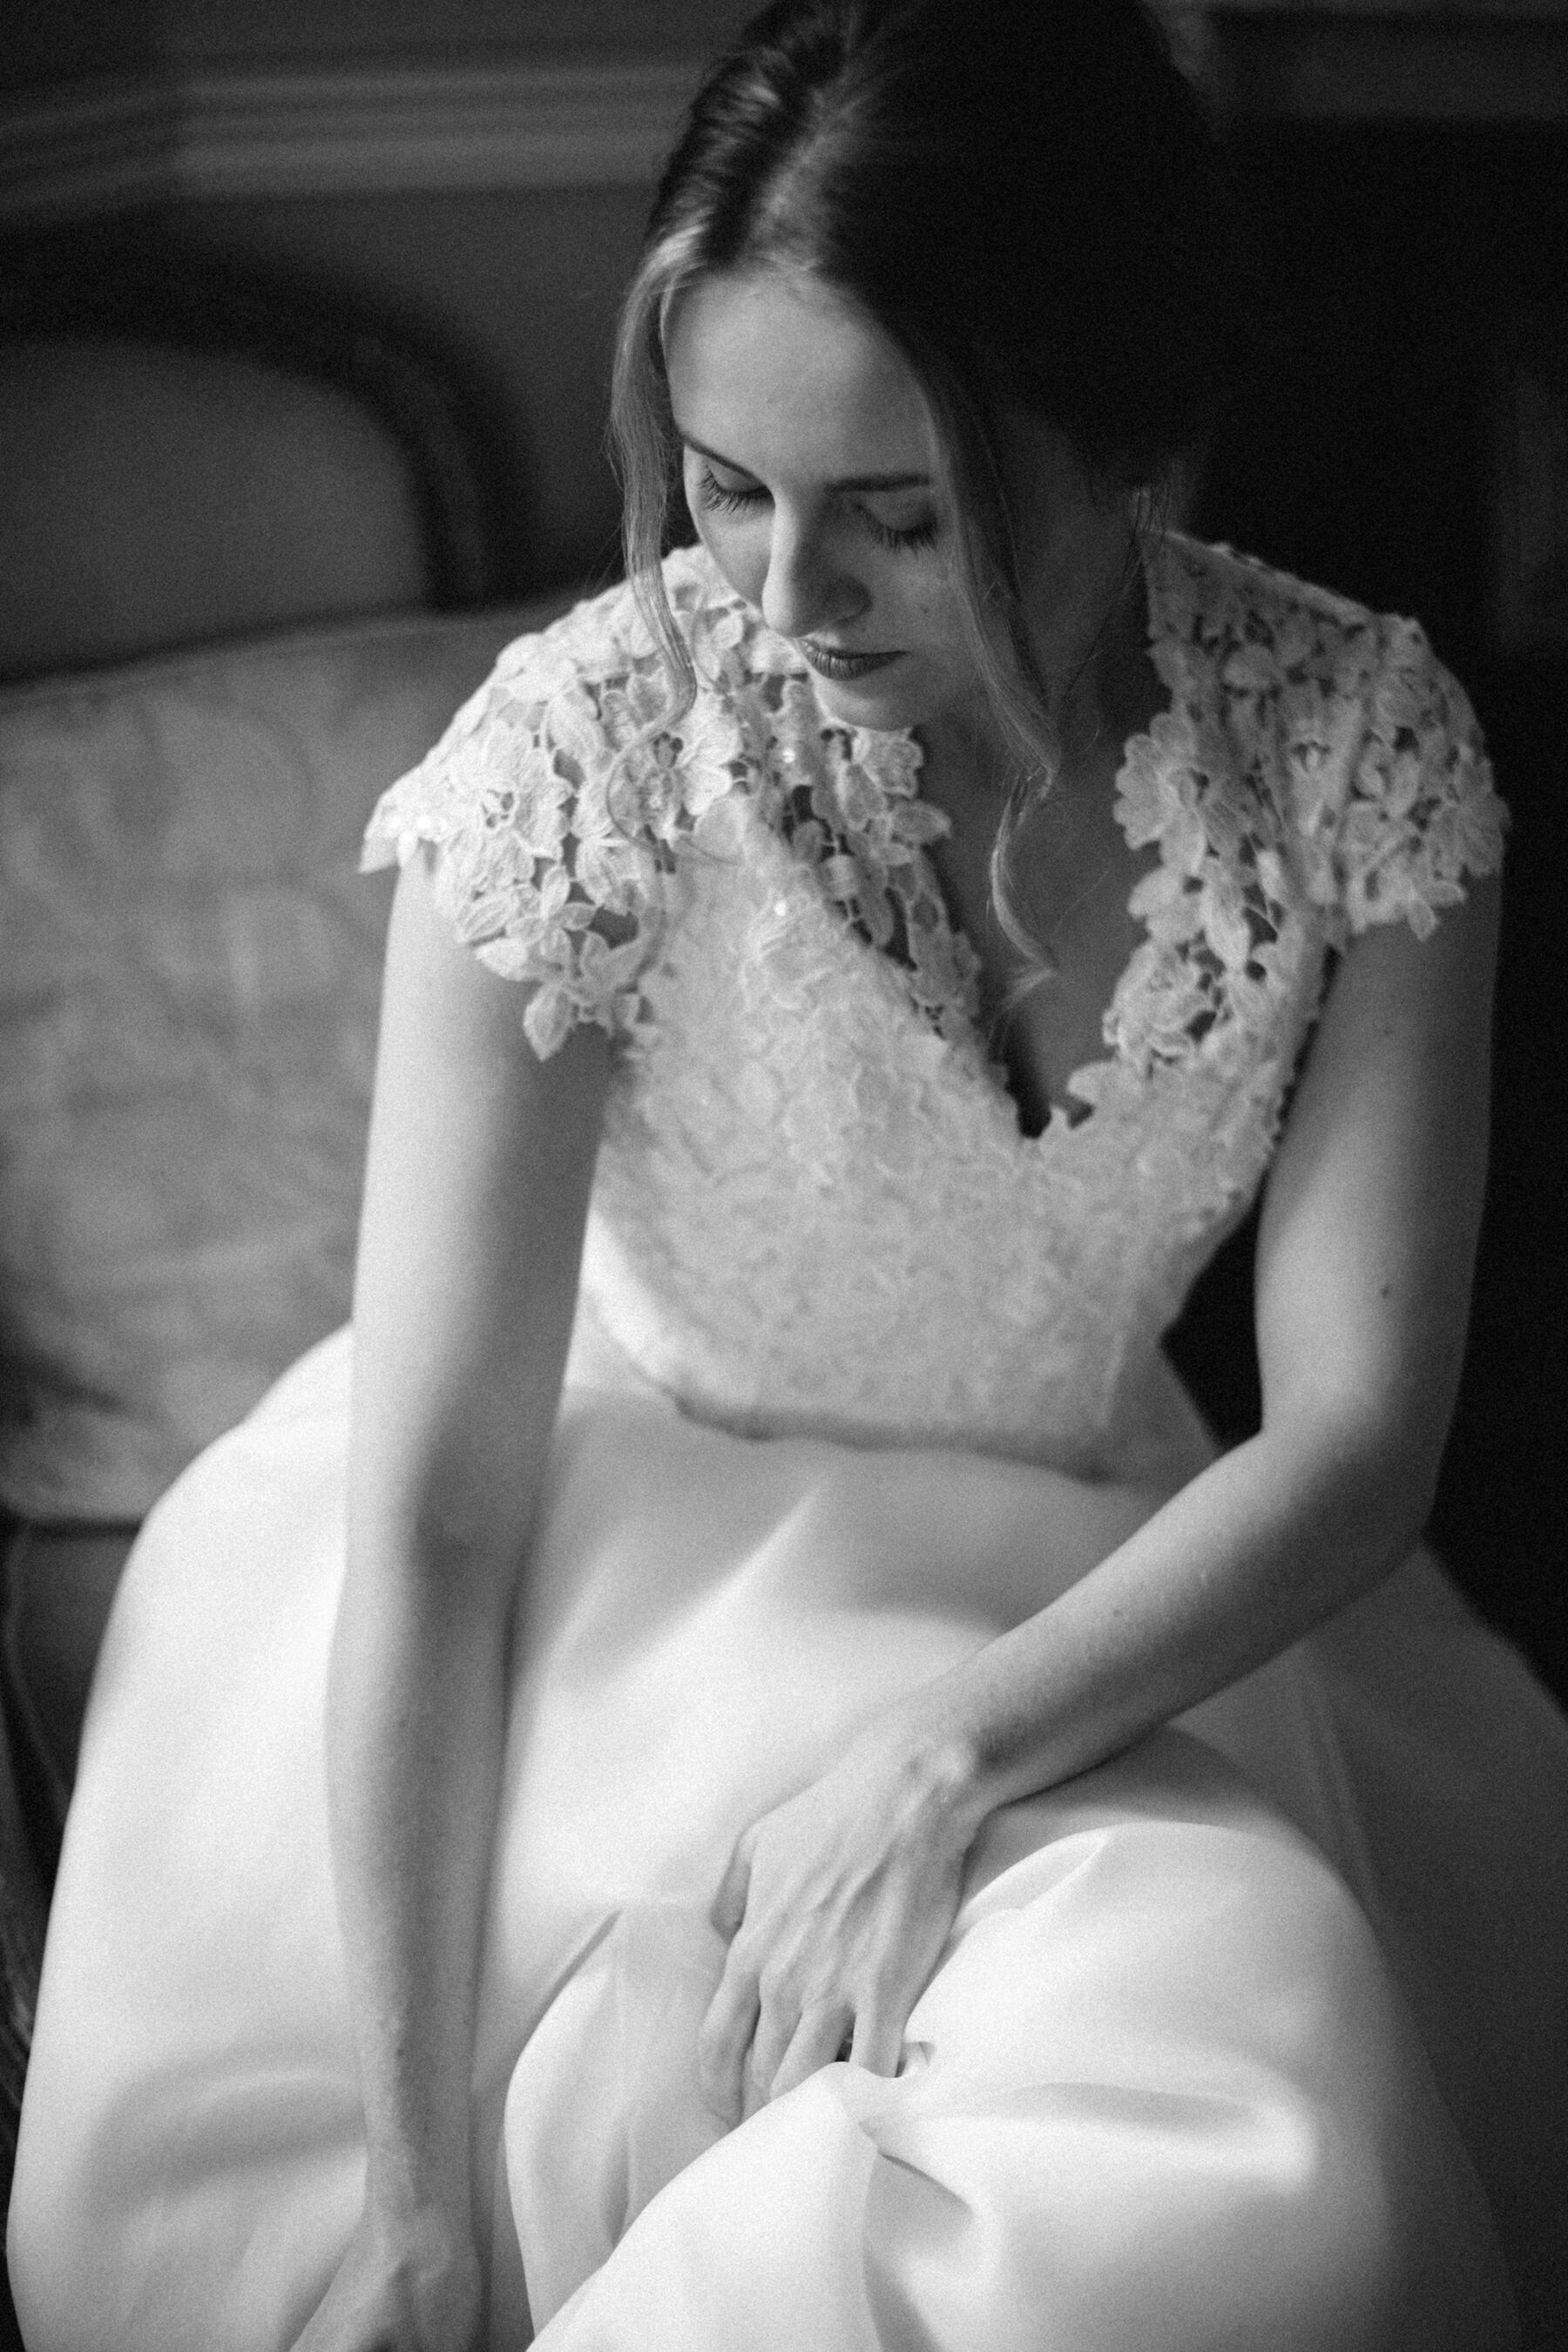 Bride putting on her wedding shoes.